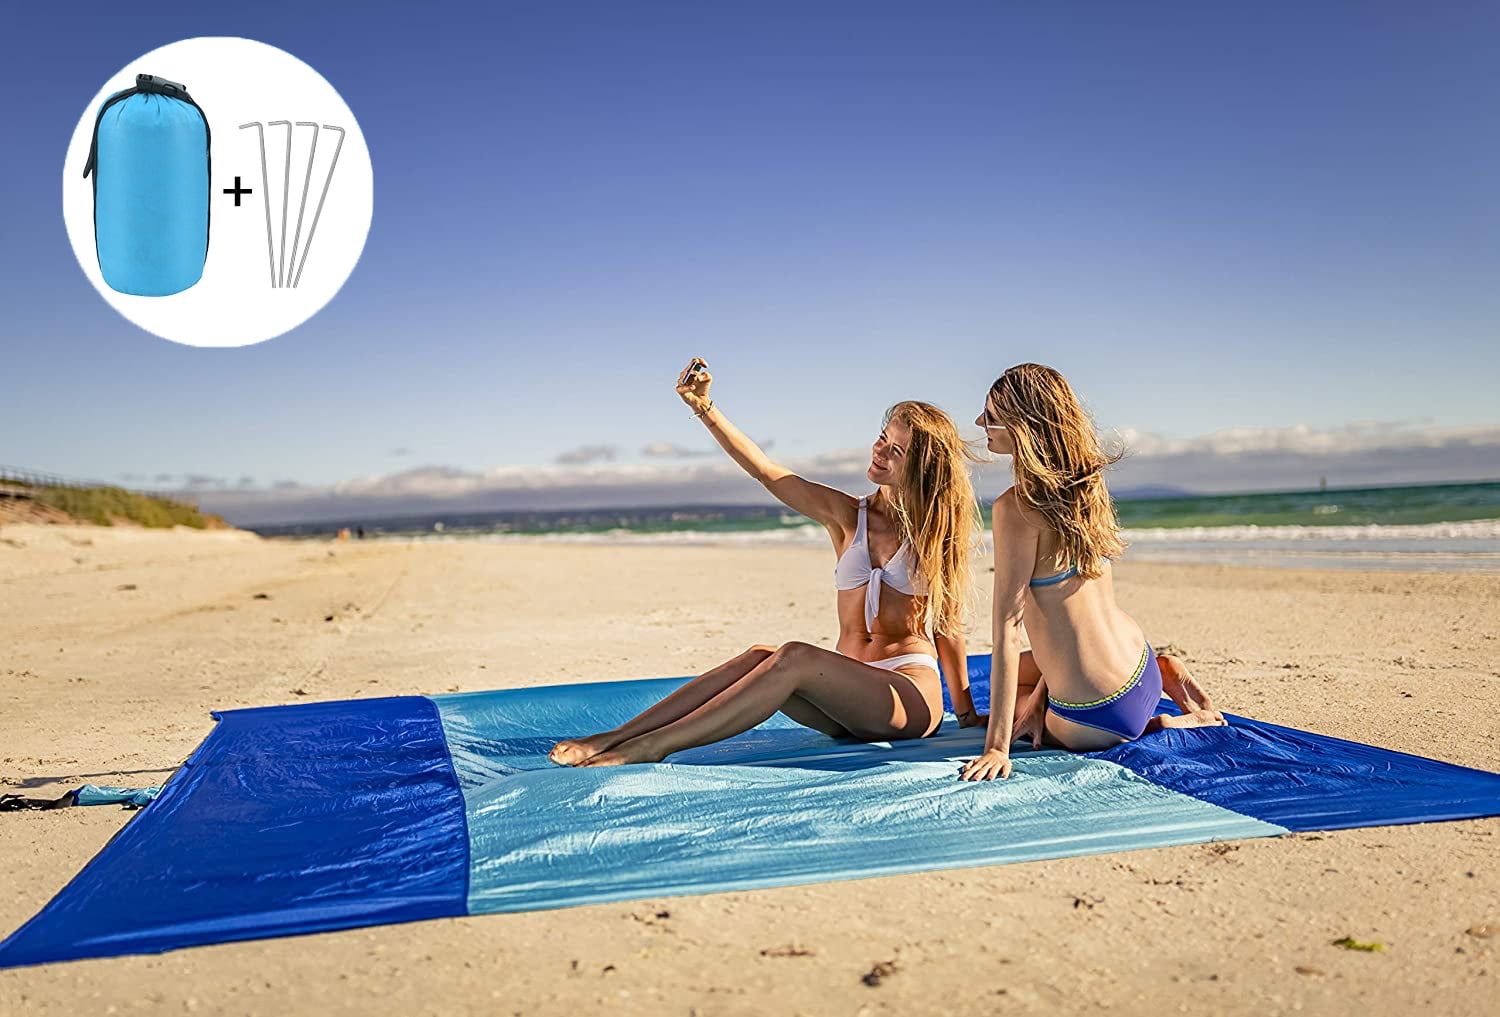 Throw or Shade Tarp Big Family Picnic Mat Beach Blanket XL Extra Large Oversized 7 x 7 Feet Used for Outdoor Camping Lightweight and Sand Proof with 4 Stakes